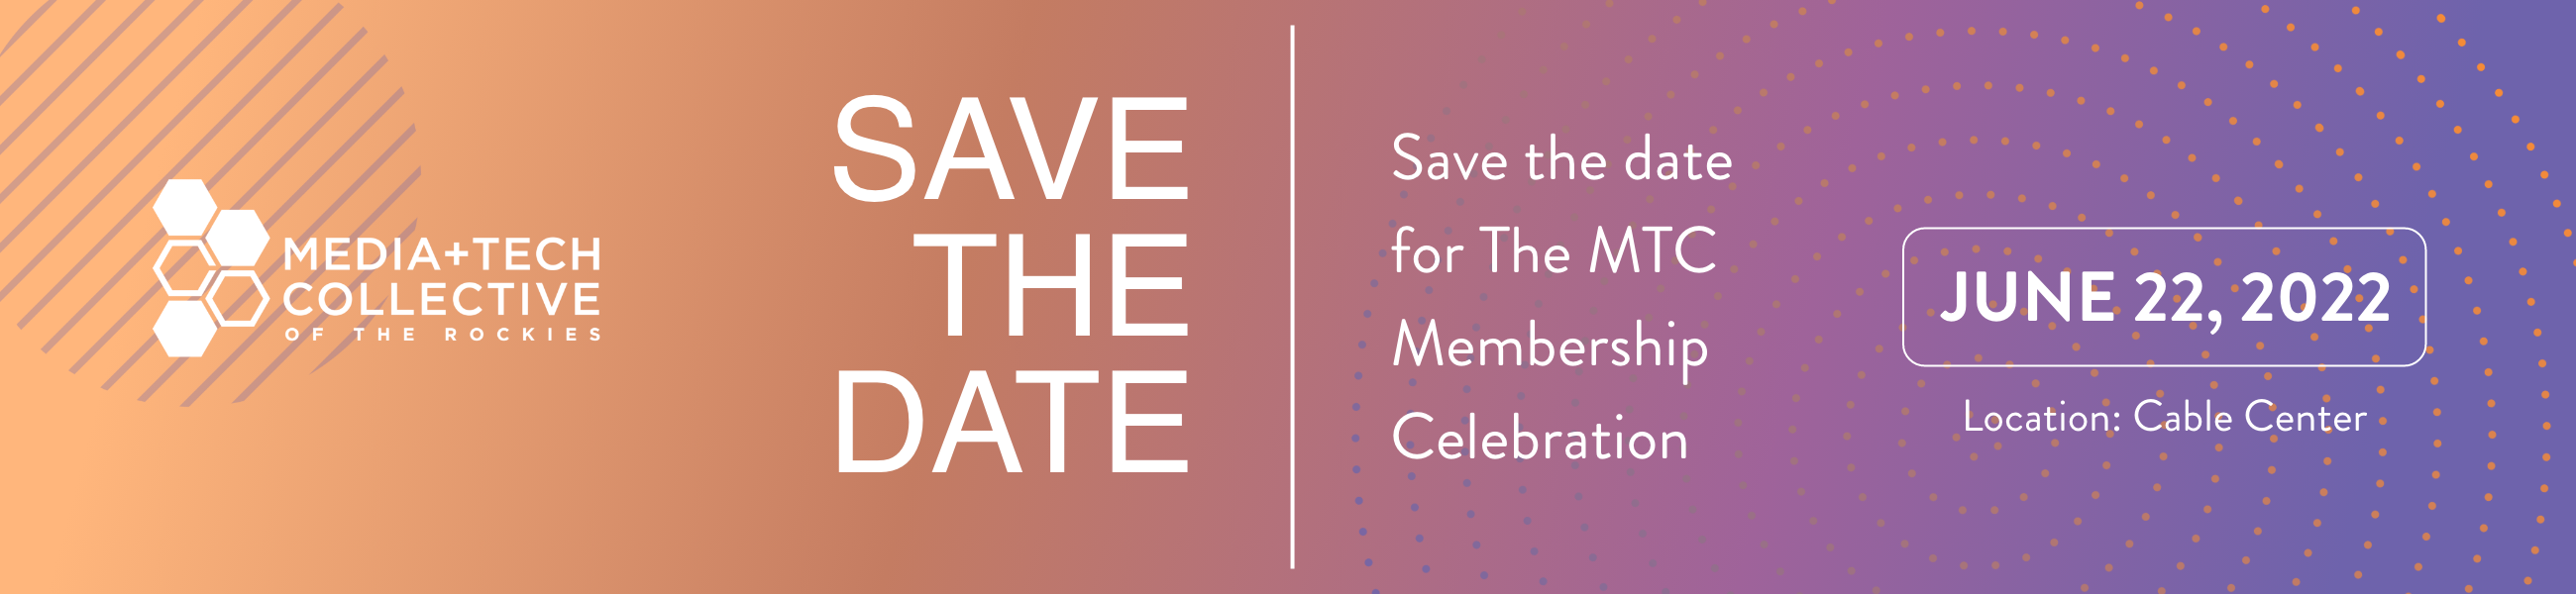 2022 Membership Mixer Banner; save the date June 22 at Cable Center